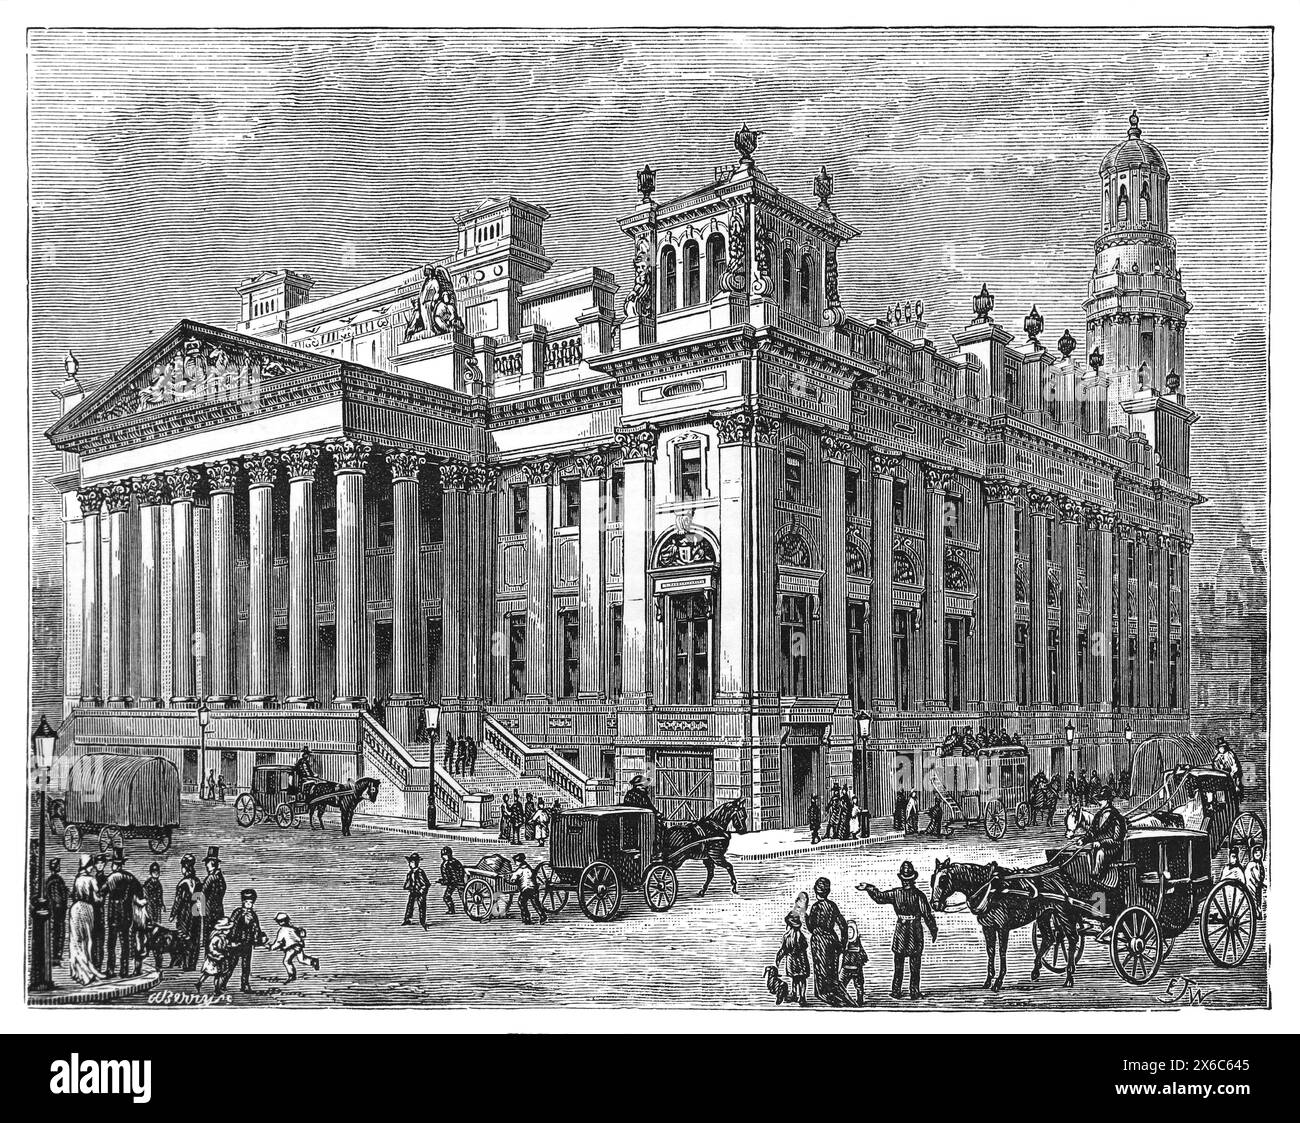 Royal Exchange, Manchester, Inghilterra. Fine del XIX secolo. Black and White Illustration from Our Own Country Vol III pubblicato da Cassell, Petter, Galpin & Co. Alla fine del XIX secolo. Foto Stock